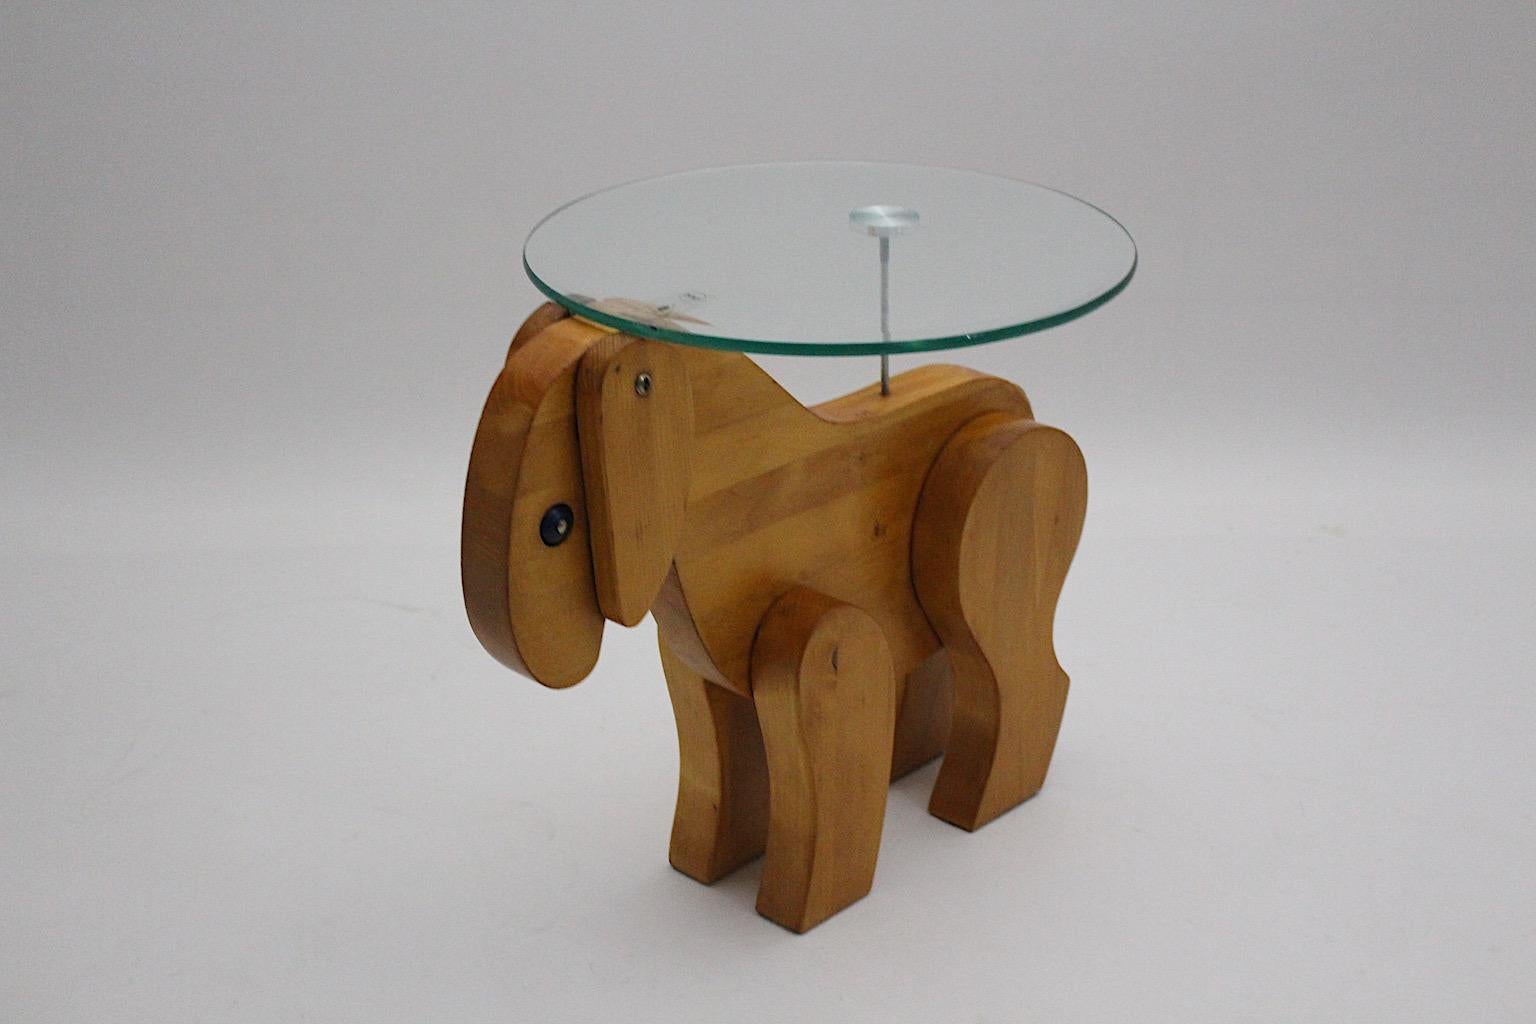 Mid-Century Modern vintage side table or coffee table from oiled ash and tempered glass plate, which was designed and made 1970s Austria.
The base shows an amazing base formed like a sheep from ash wood and cords, while the clear facetted glass